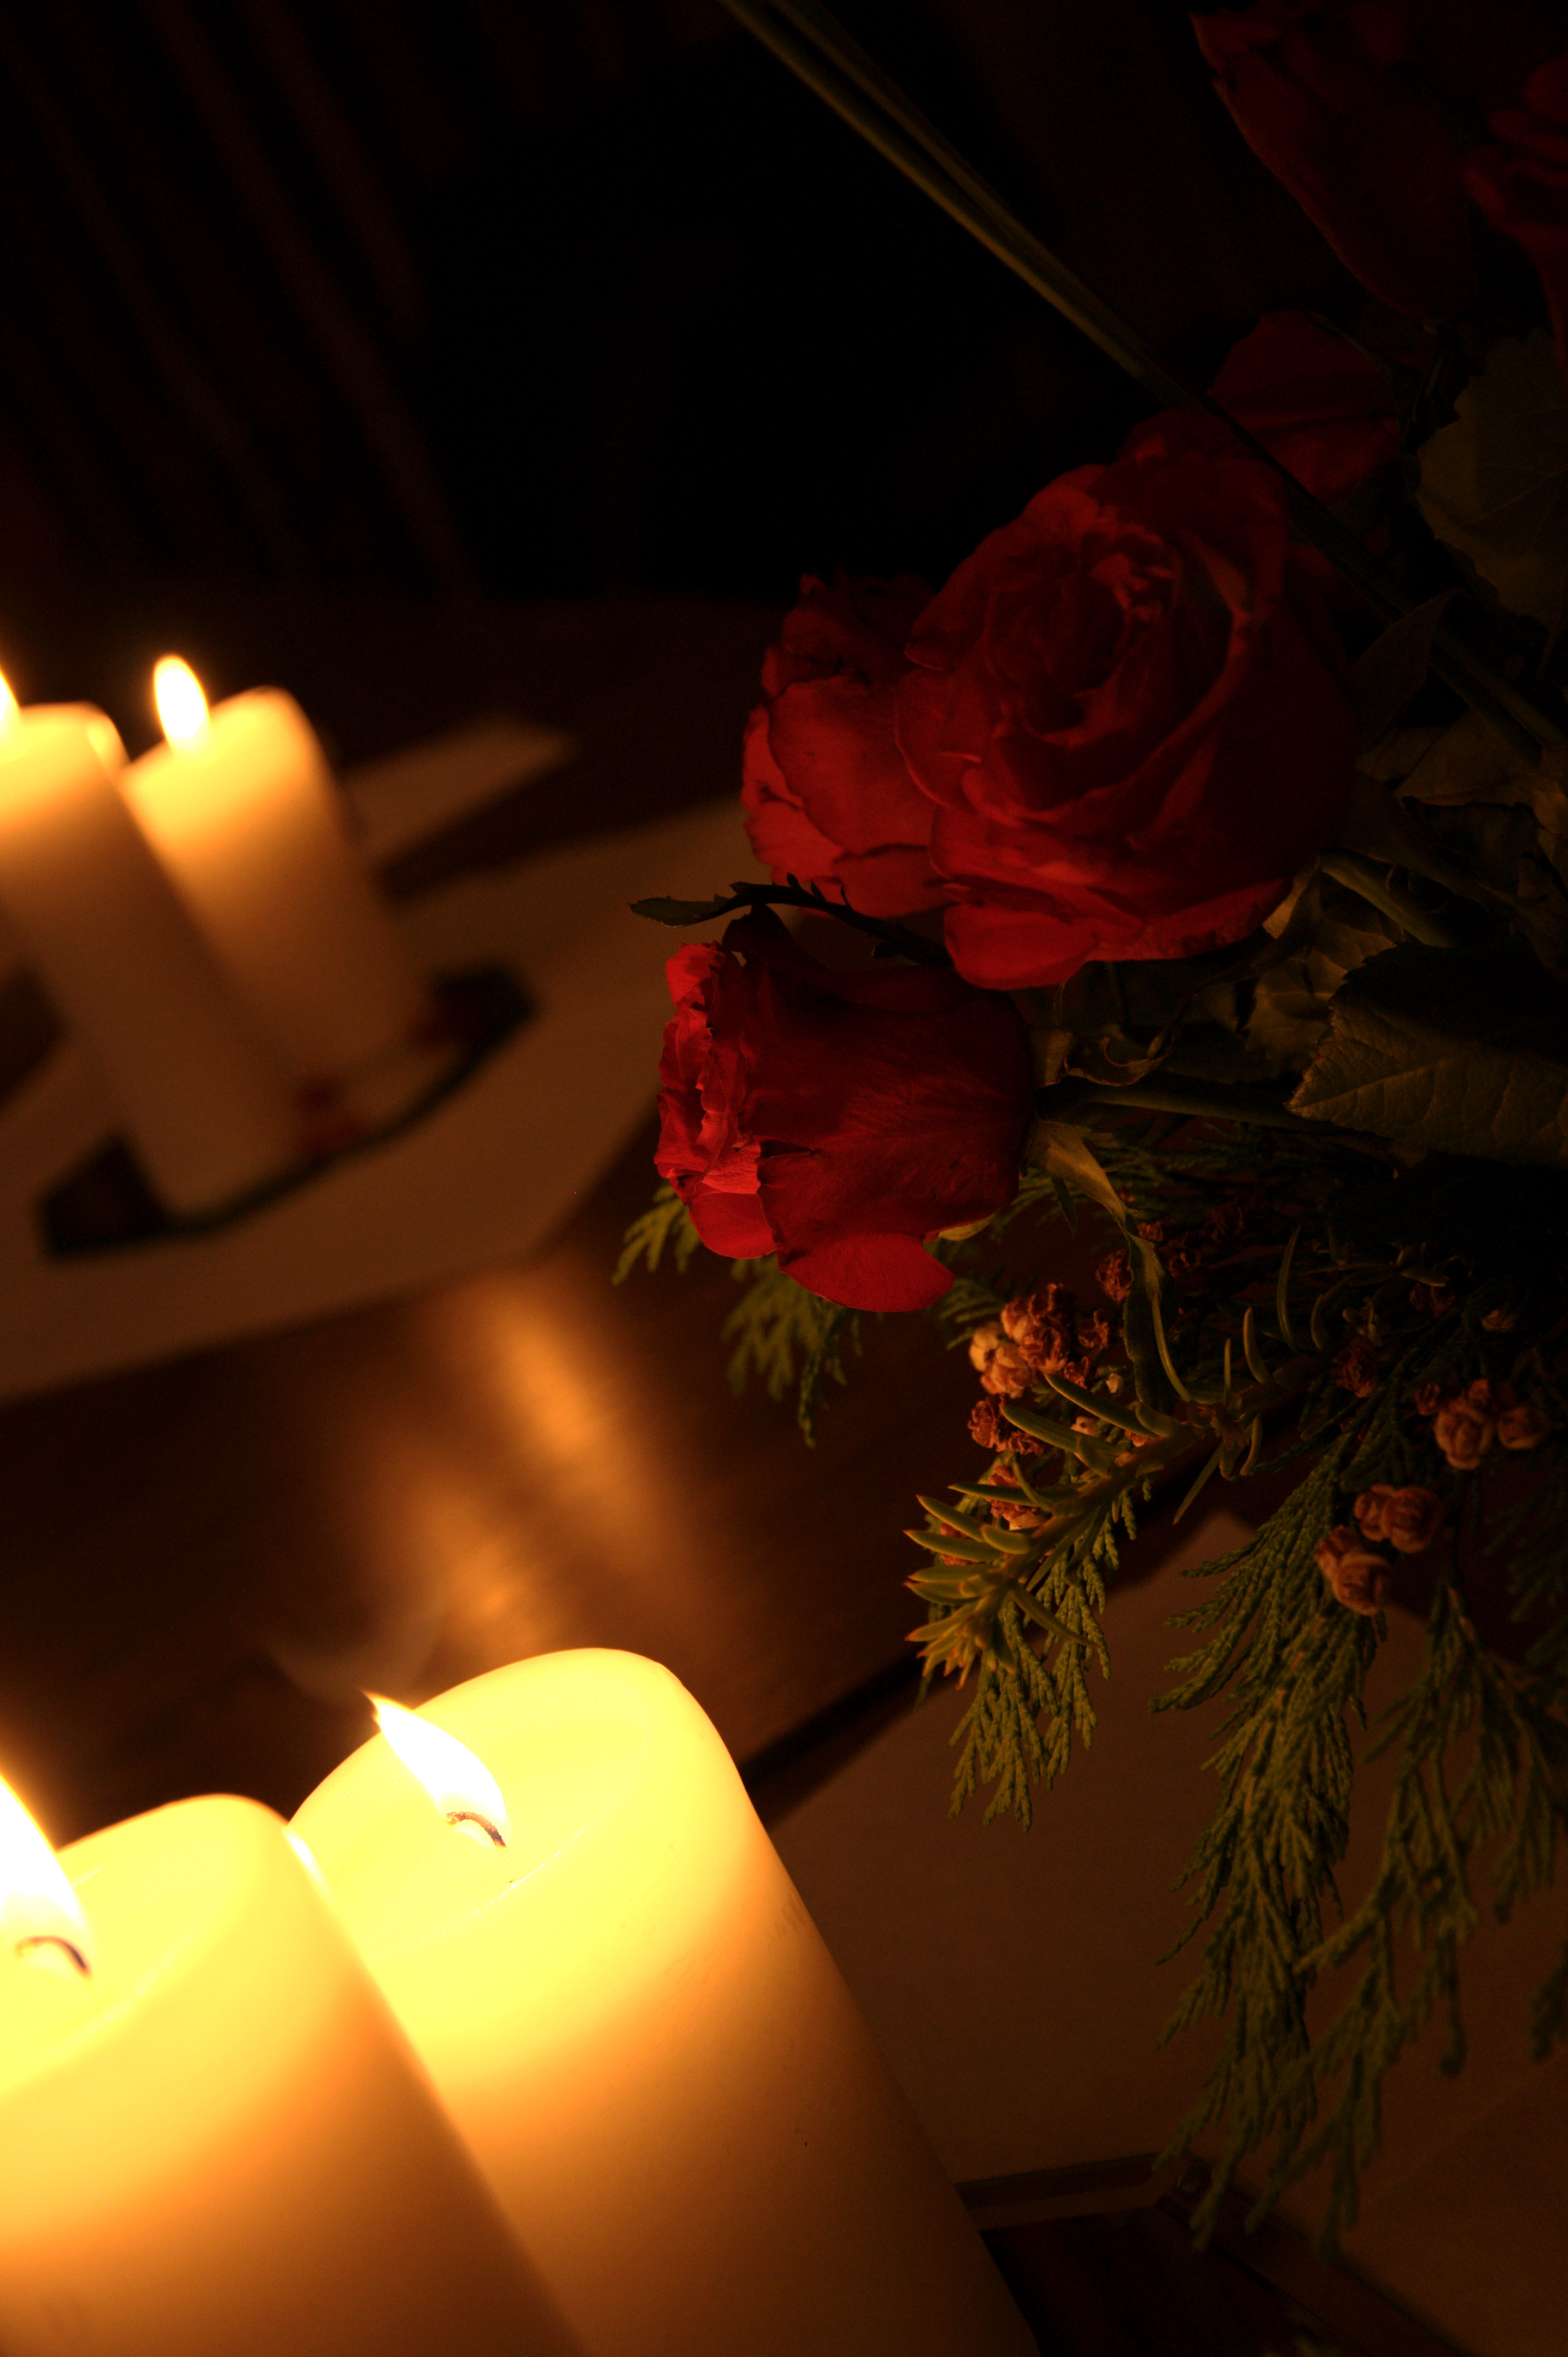 Candles and Roses | photo page - everystockphoto